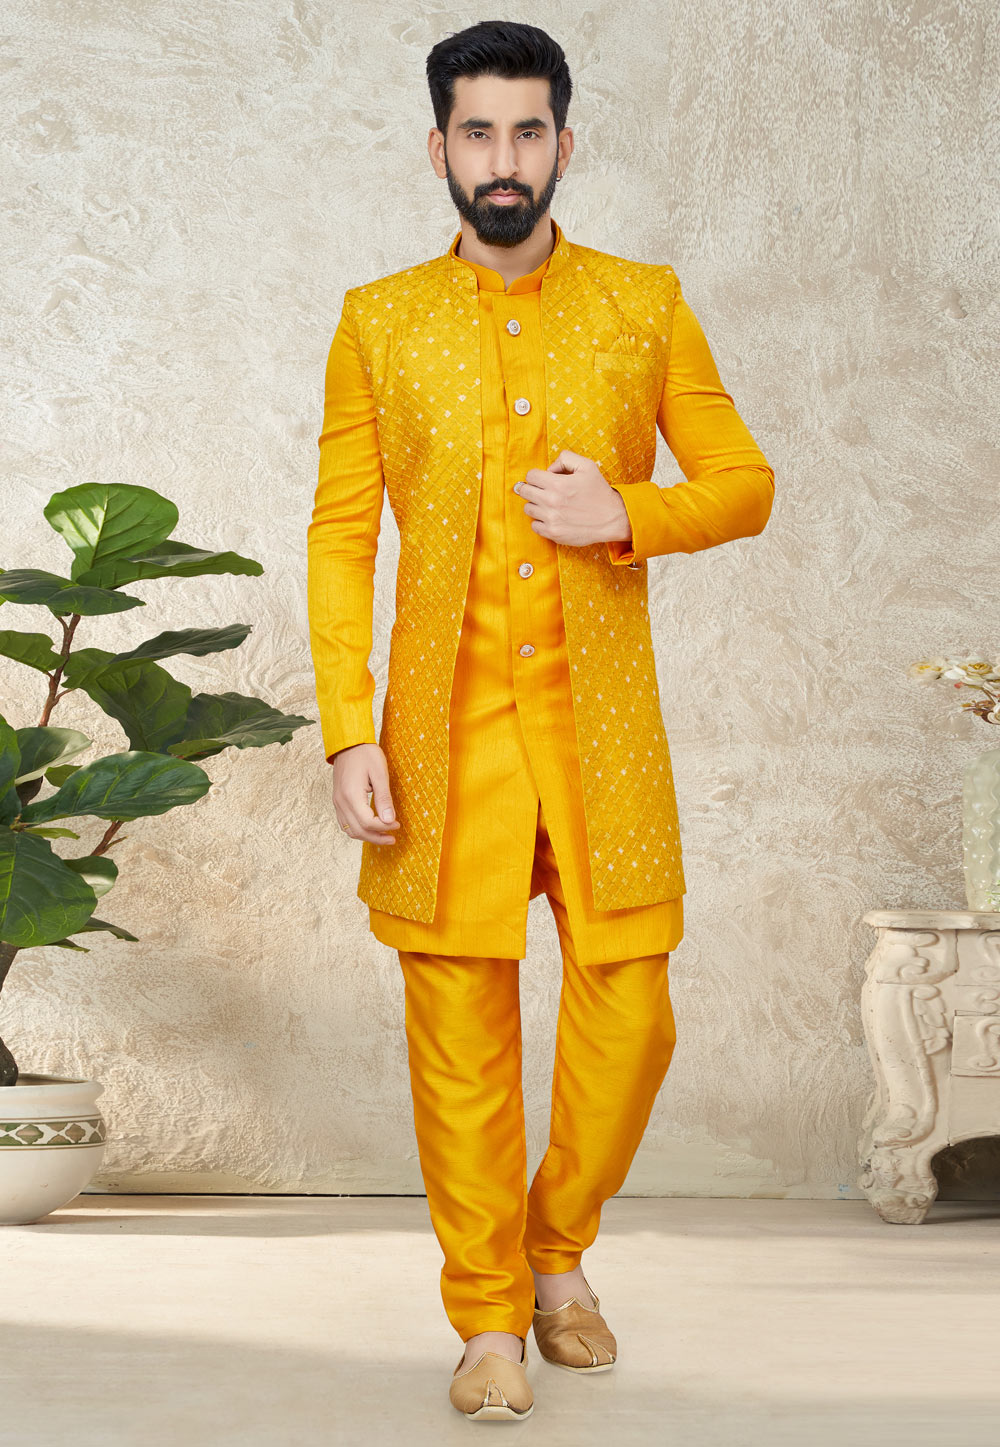 Fawn and Yellow colour Royal Indo Western Gown – Panache Haute Couture